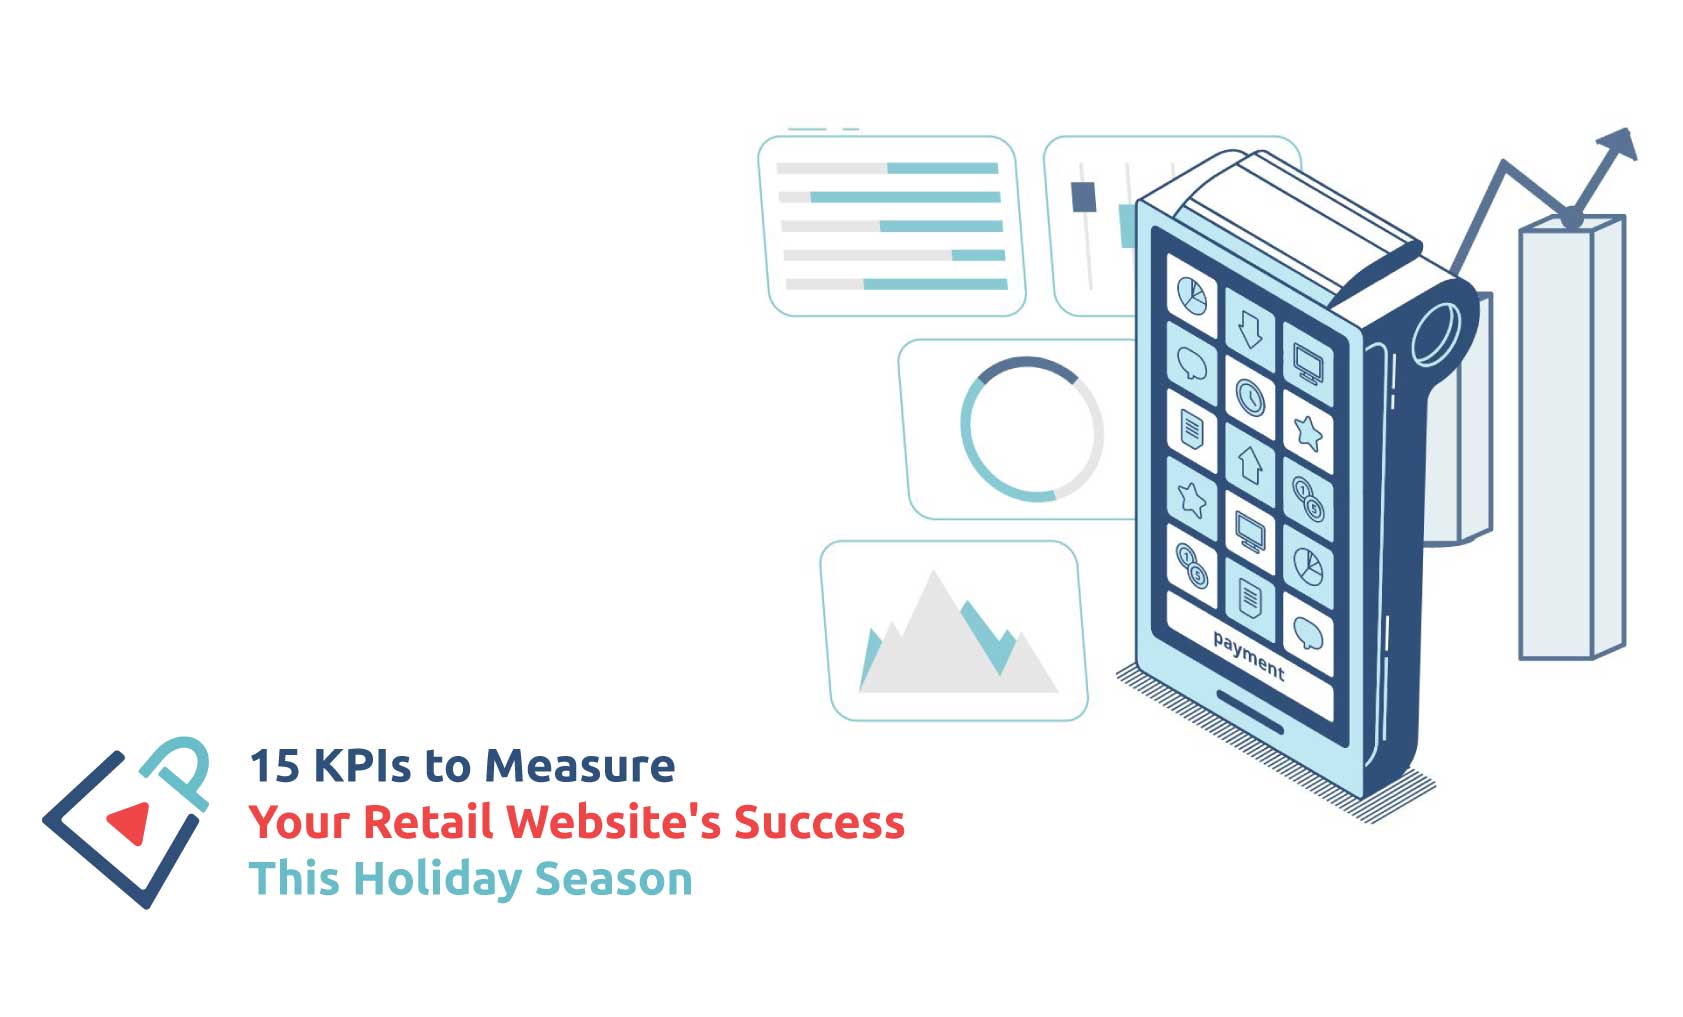 15 KPIs to Measure Your Retail Website's Success This Holiday Season